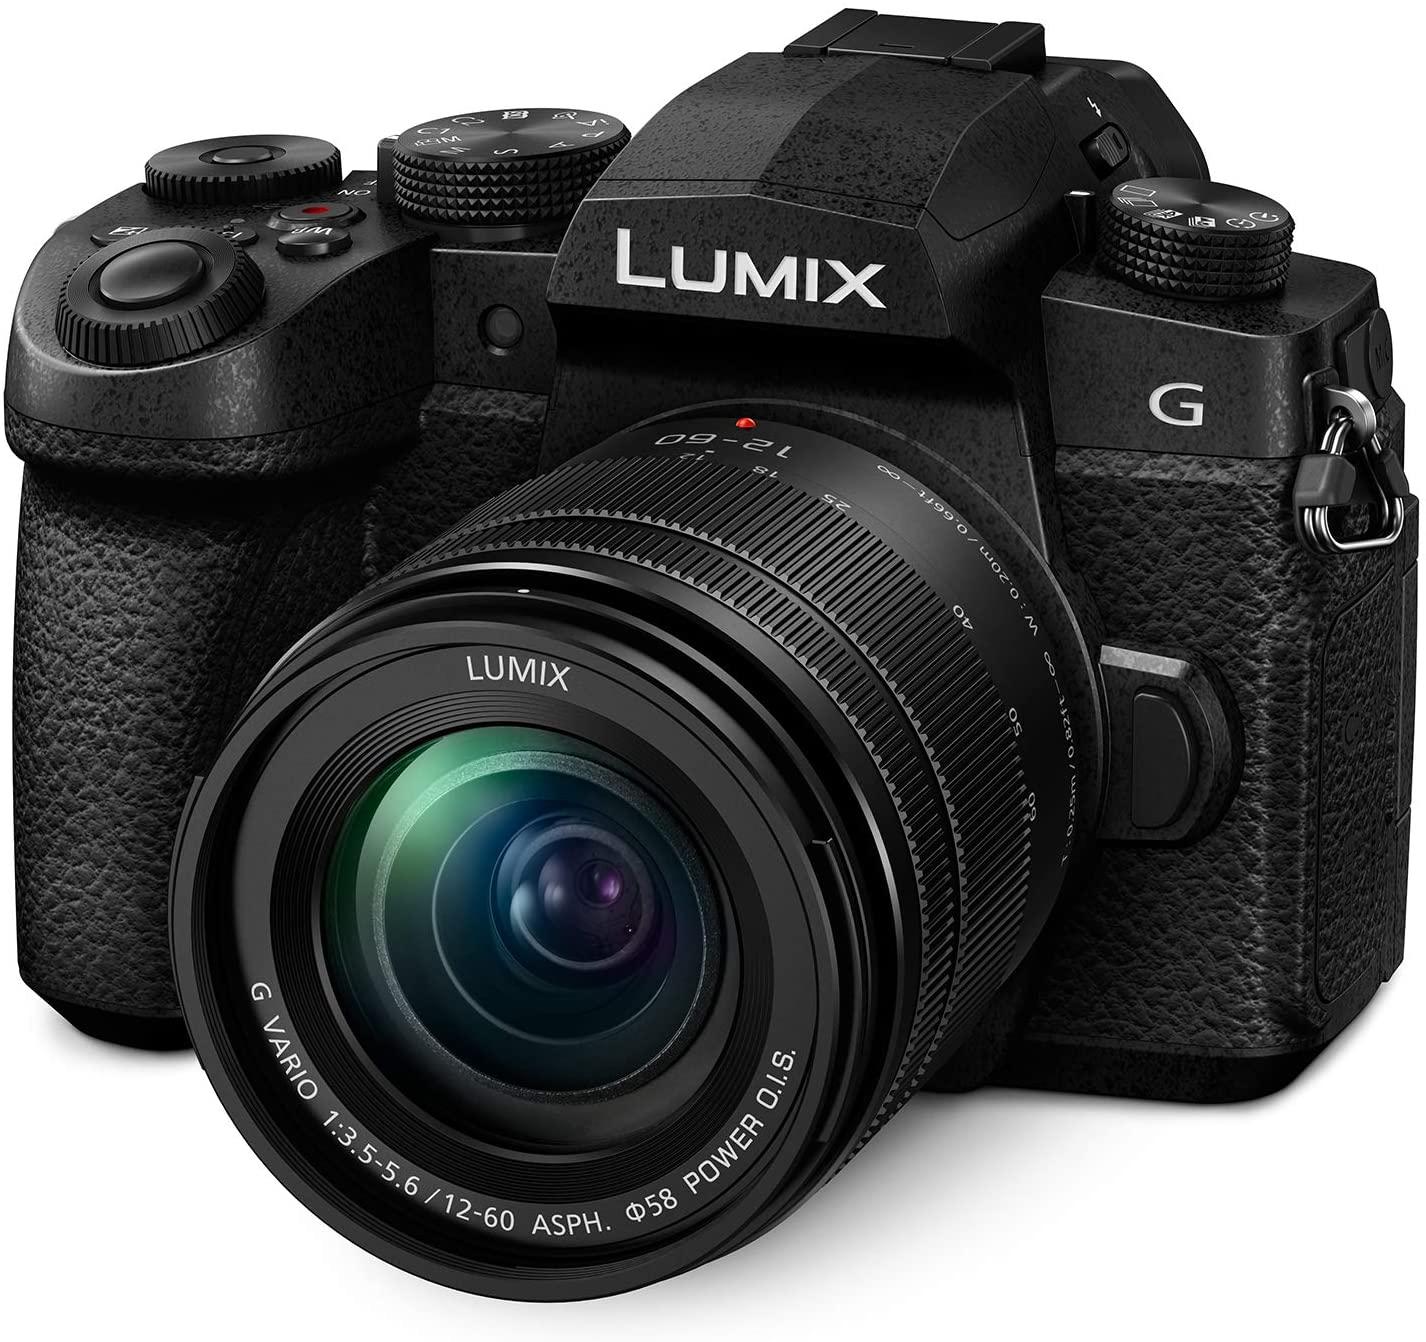 Panasonic LUMIX G95 Mirrorless Camera with 12-60mm Lens for $699.99 Shipped